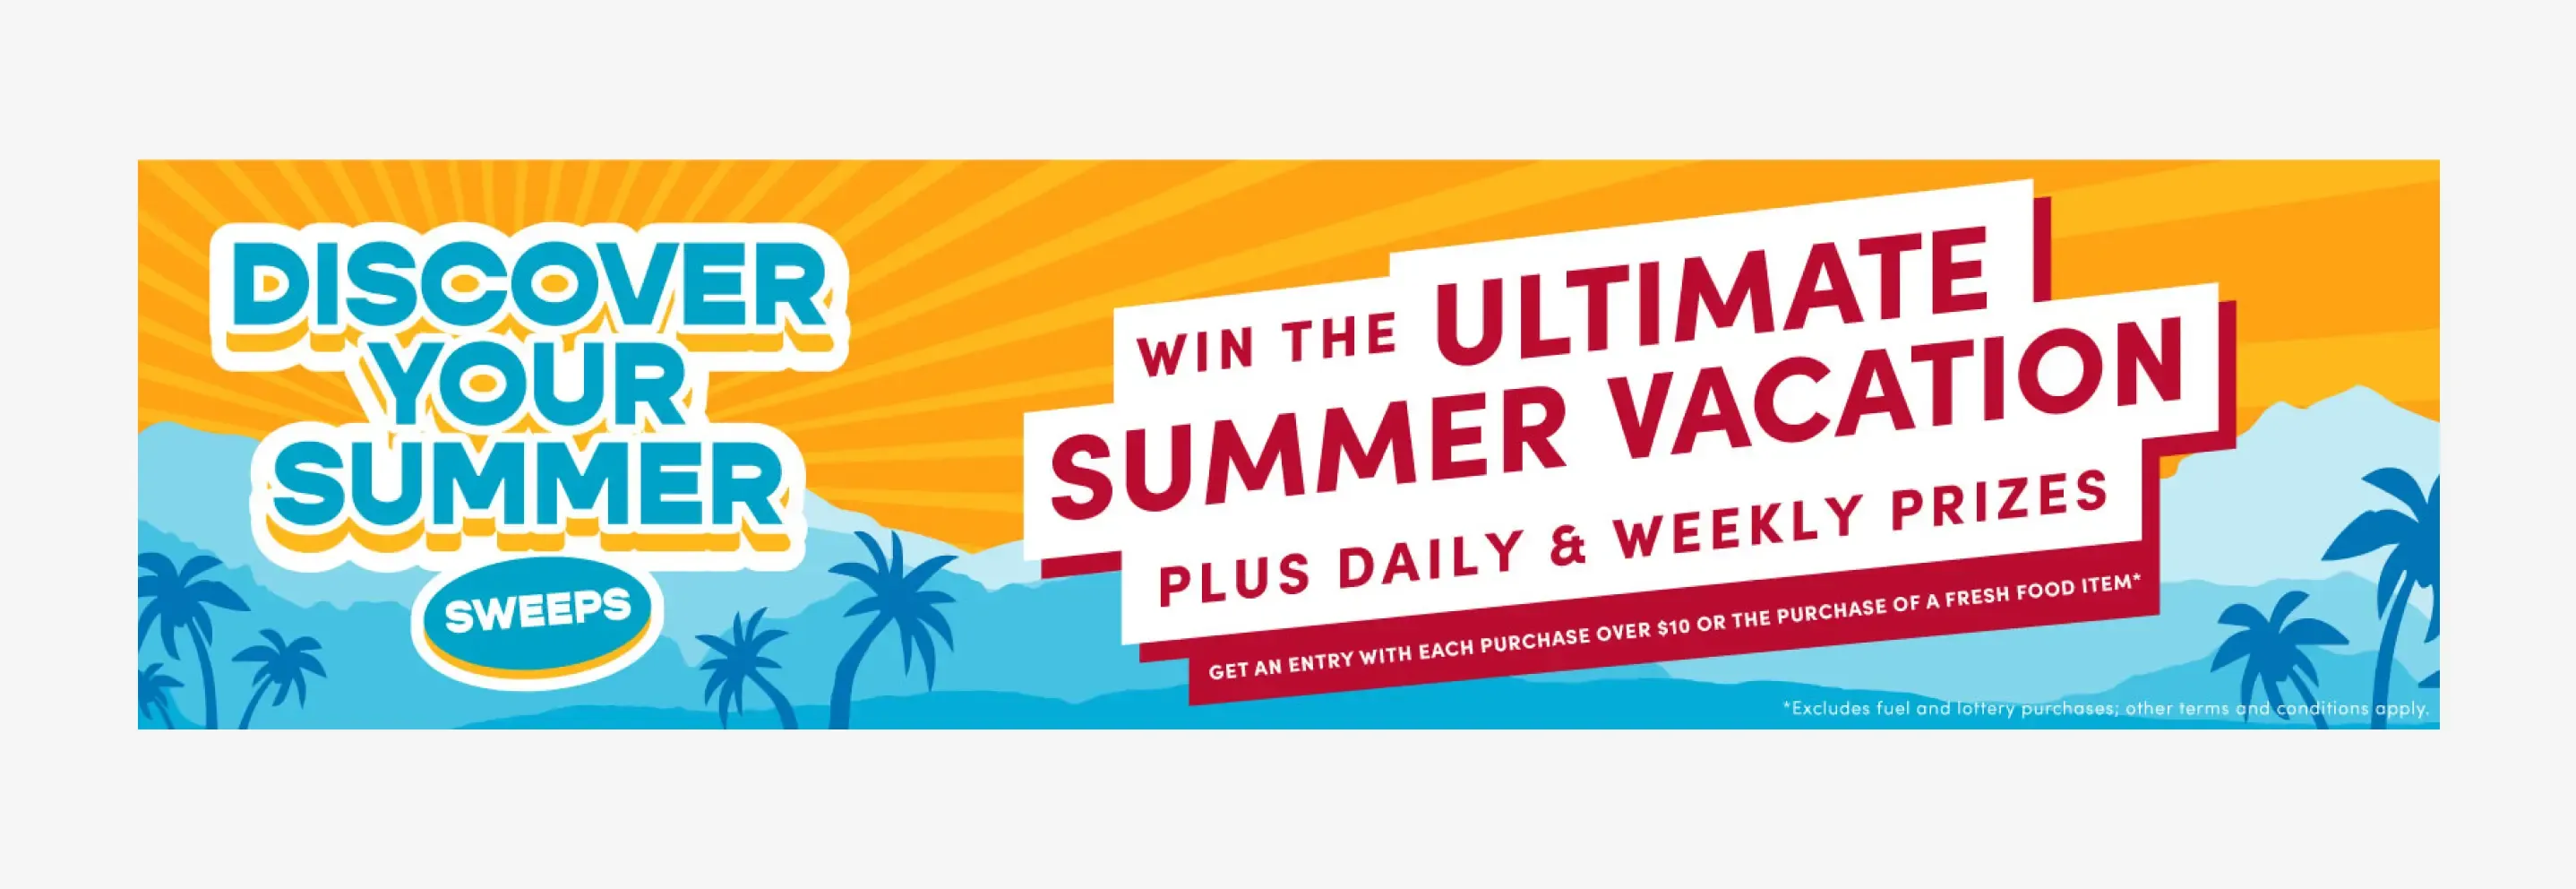 Win the Ultimate Summer Vacation with Kum & Go